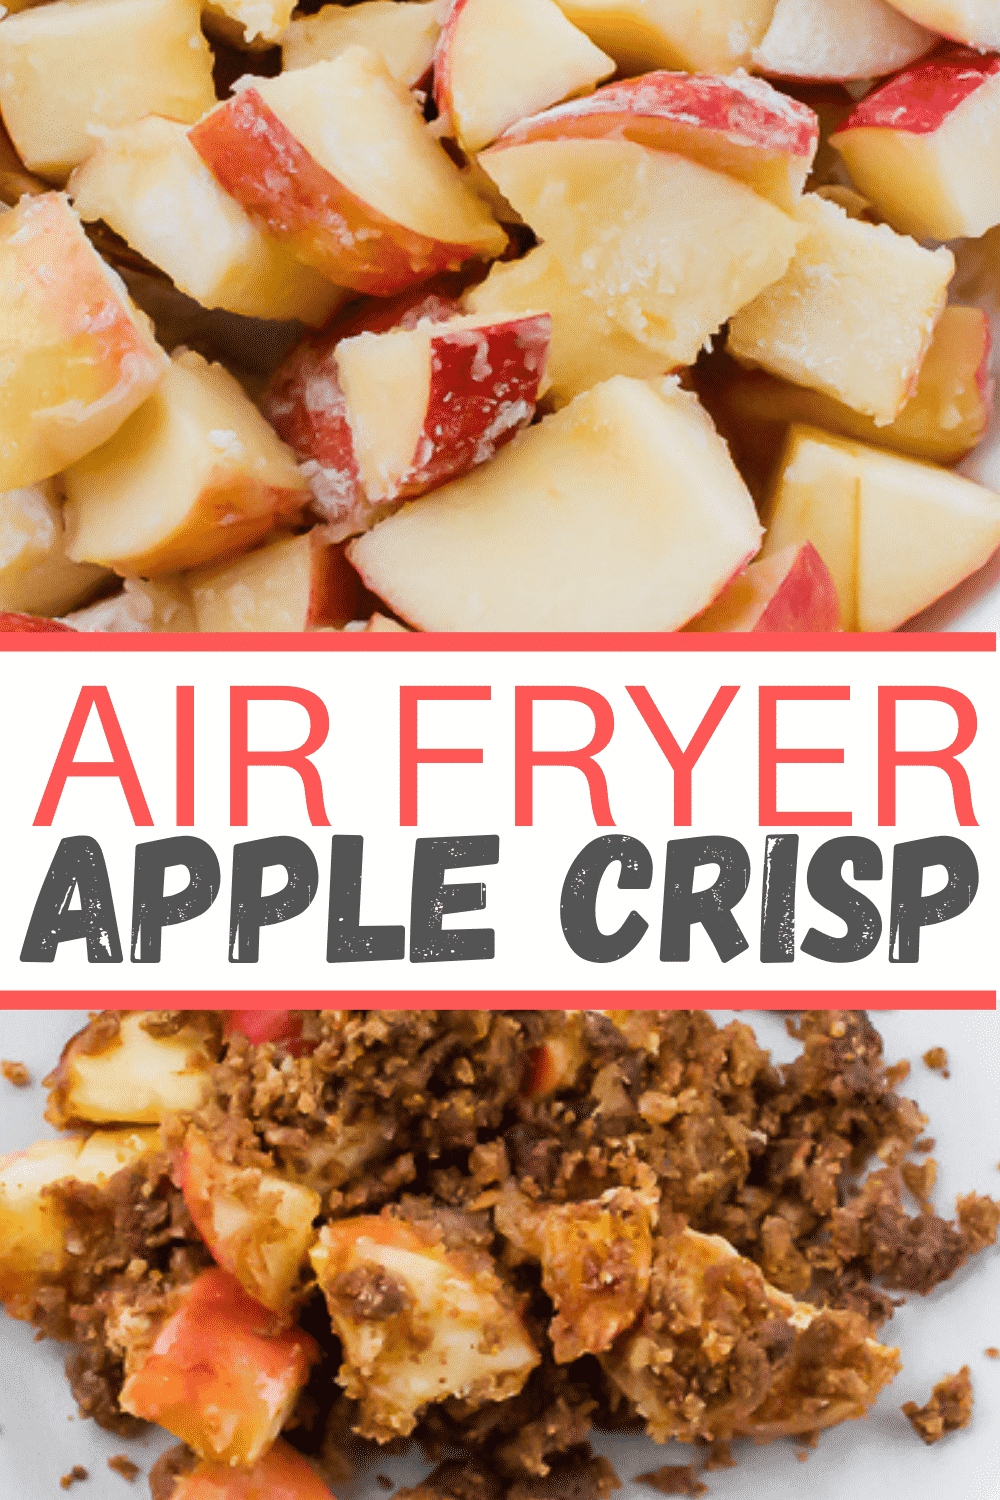 This simple yet delicious Air Fryer Apple Crisp is the perfect holiday dessert! The crunchy oat topping and sweet cooked apple filling goes great on every table. #applecrisp #airfryerdessert via @vegetarianmamma